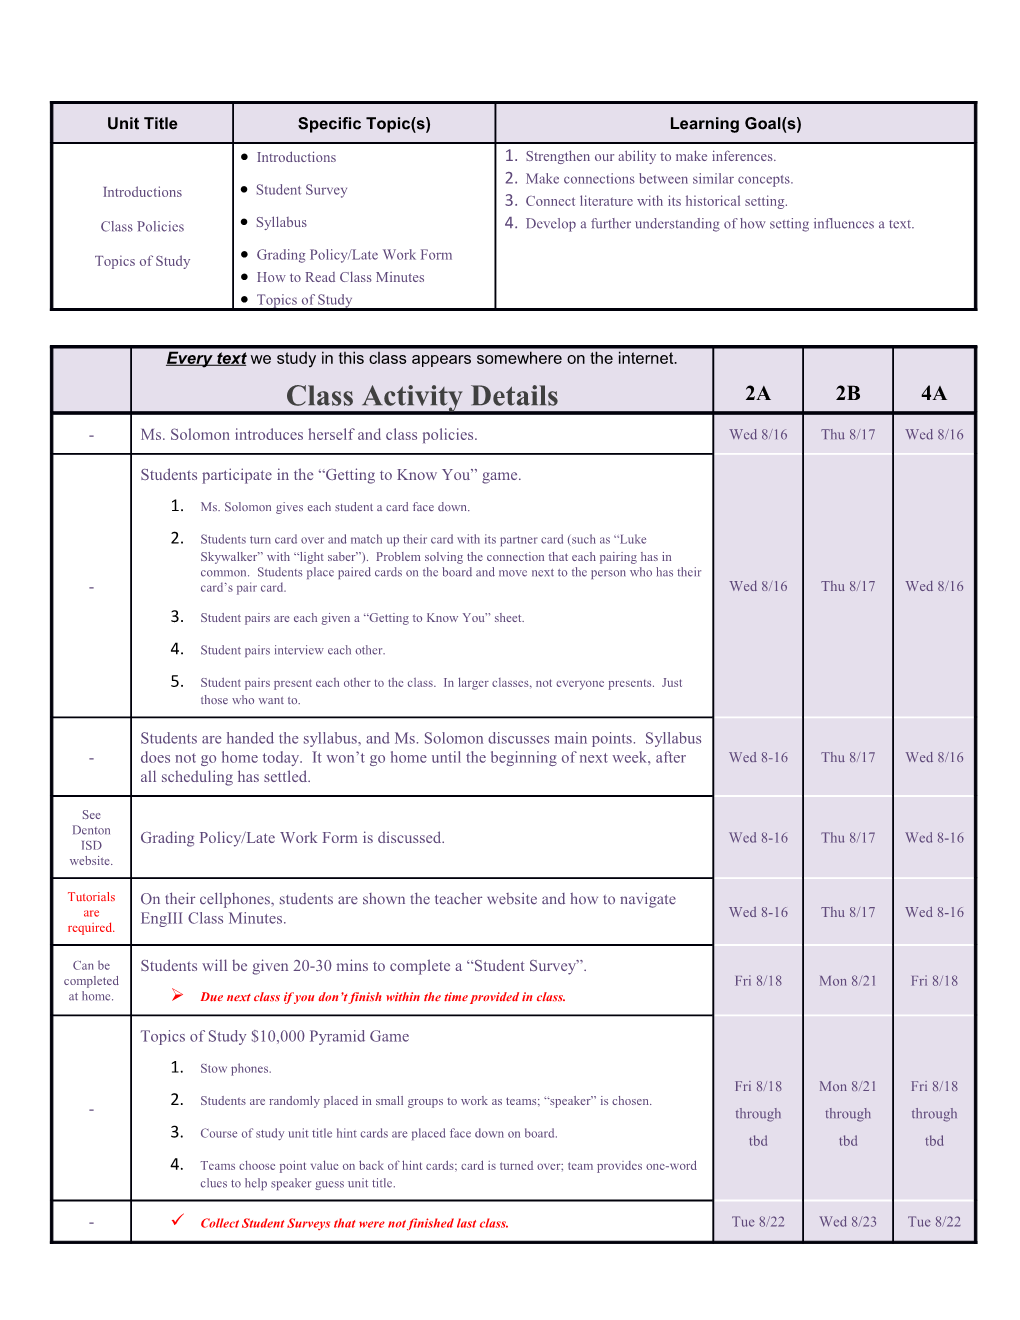 Grading Policy/Late Work Form